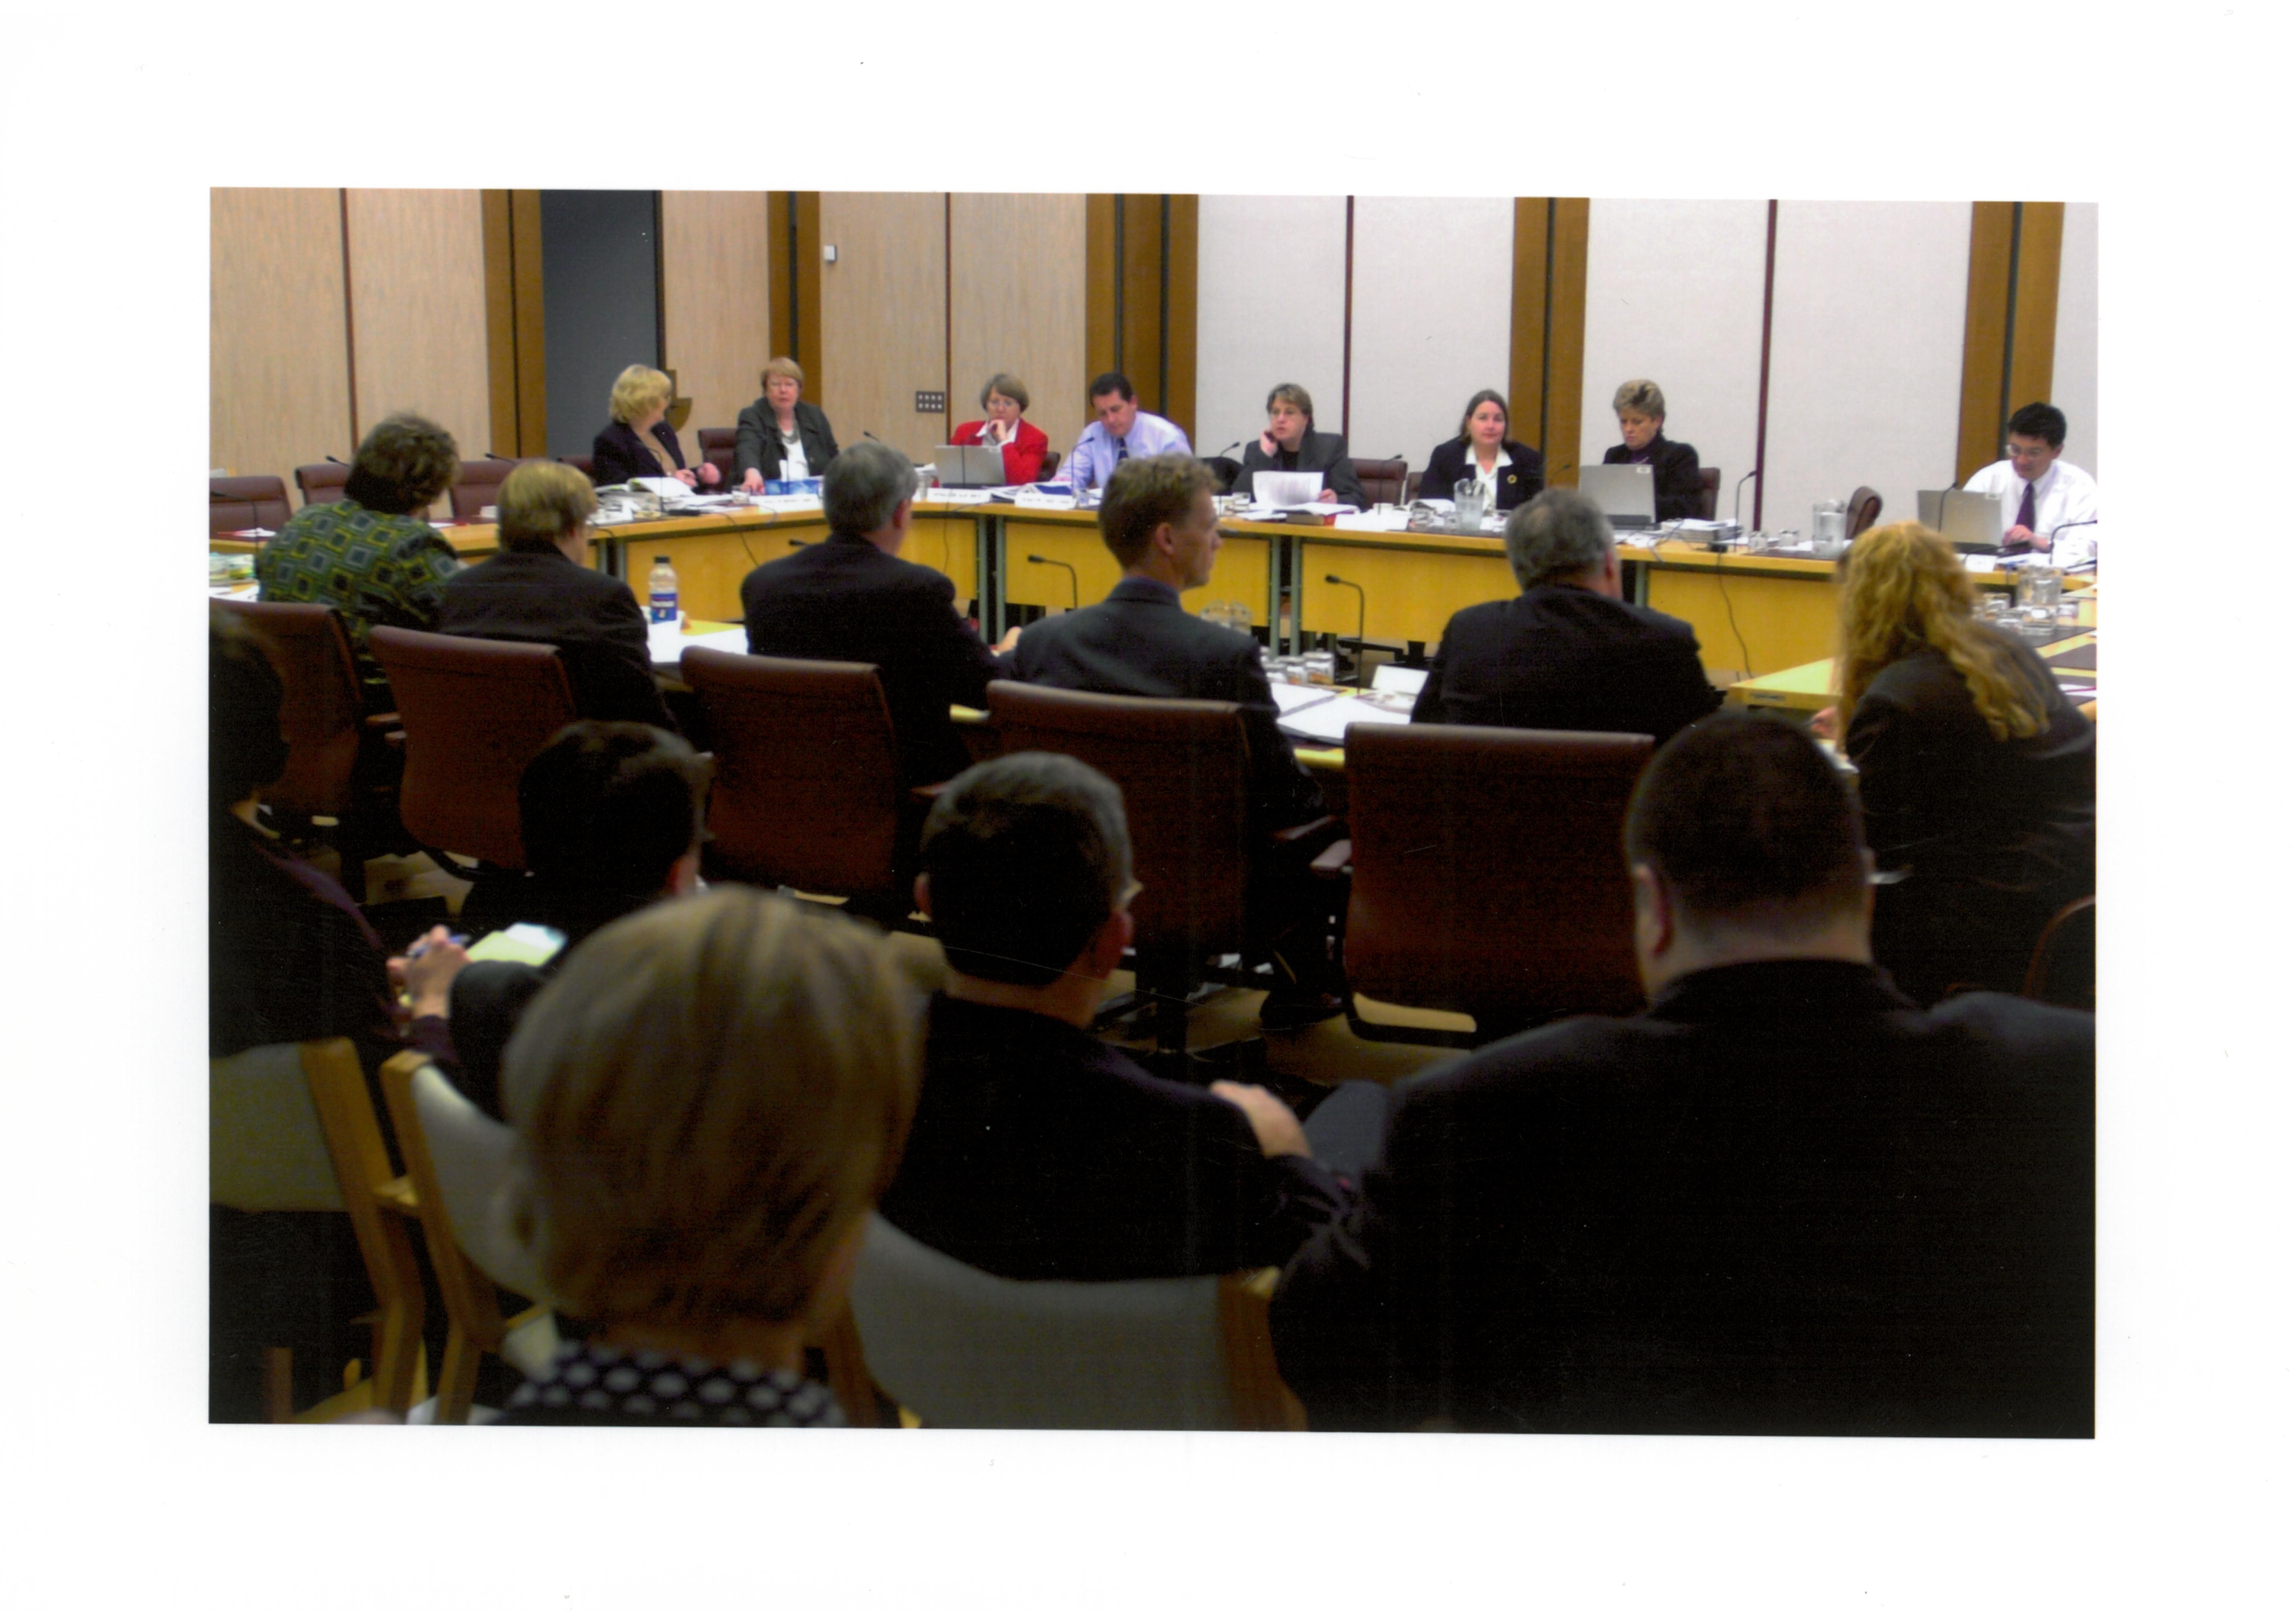 Community Affairs Legislation Committee questioning officers from the Department of Health and Aged Care at a budget estimates hearing, 28 May 2001. Seated facing camera L-R: Senators Brenda Gibbs, Kay Denman, Sue West, Chris Evans and Trish Crossin, Christine McDonald [Acting Secretary], Senators Sue Knowles [Chair] and Tsebin Tchen.